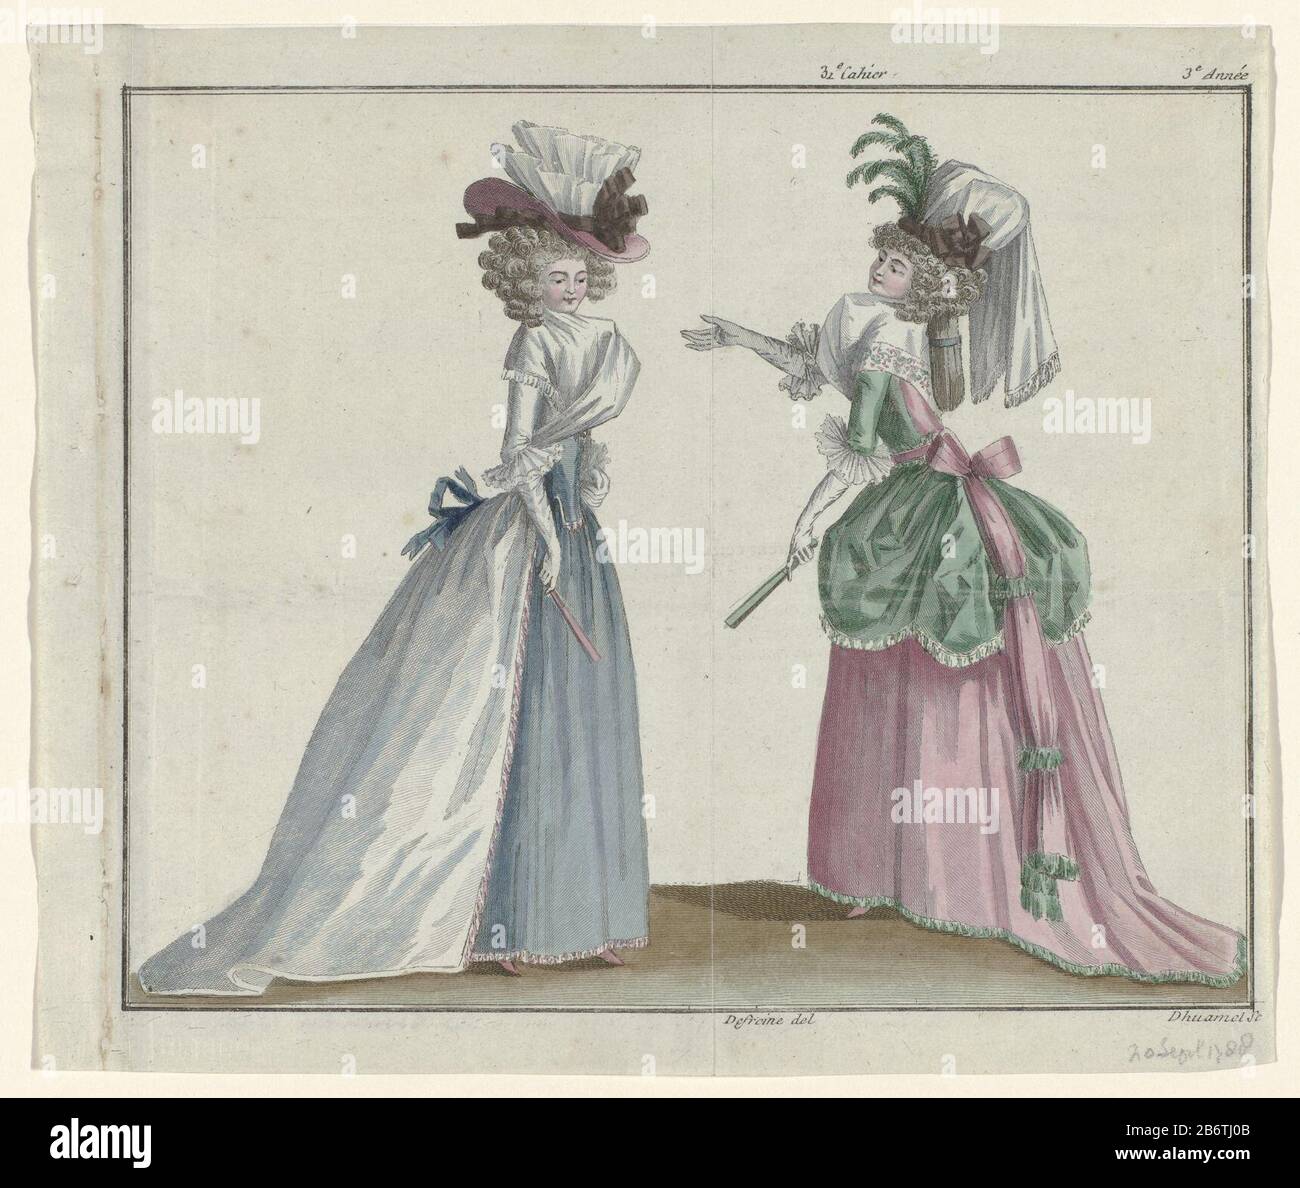 Left: woman in a gown of white crepe on a bodice and petticoat of blue 'gros de Tours. Right: woman in a quit apple green and pink petticoat dress on a long trail of pink satin. The picture is part of the 31 Cahier, 3e année, from the series Magasin des Modes Nouvelles et Françaises Anglaises. The series consists of 172 fashion prints, published by Buisson, Paris 20 November 1786-21 décembre 1789. Manufacturer : printmaker: A. B. Duhamel (indicated on object) to drawing of: Defraine (indicated on object) publisher: Buisson Place manufacture: Paris Date: 1788 Physical characteristics: engra, ha Stock Photo